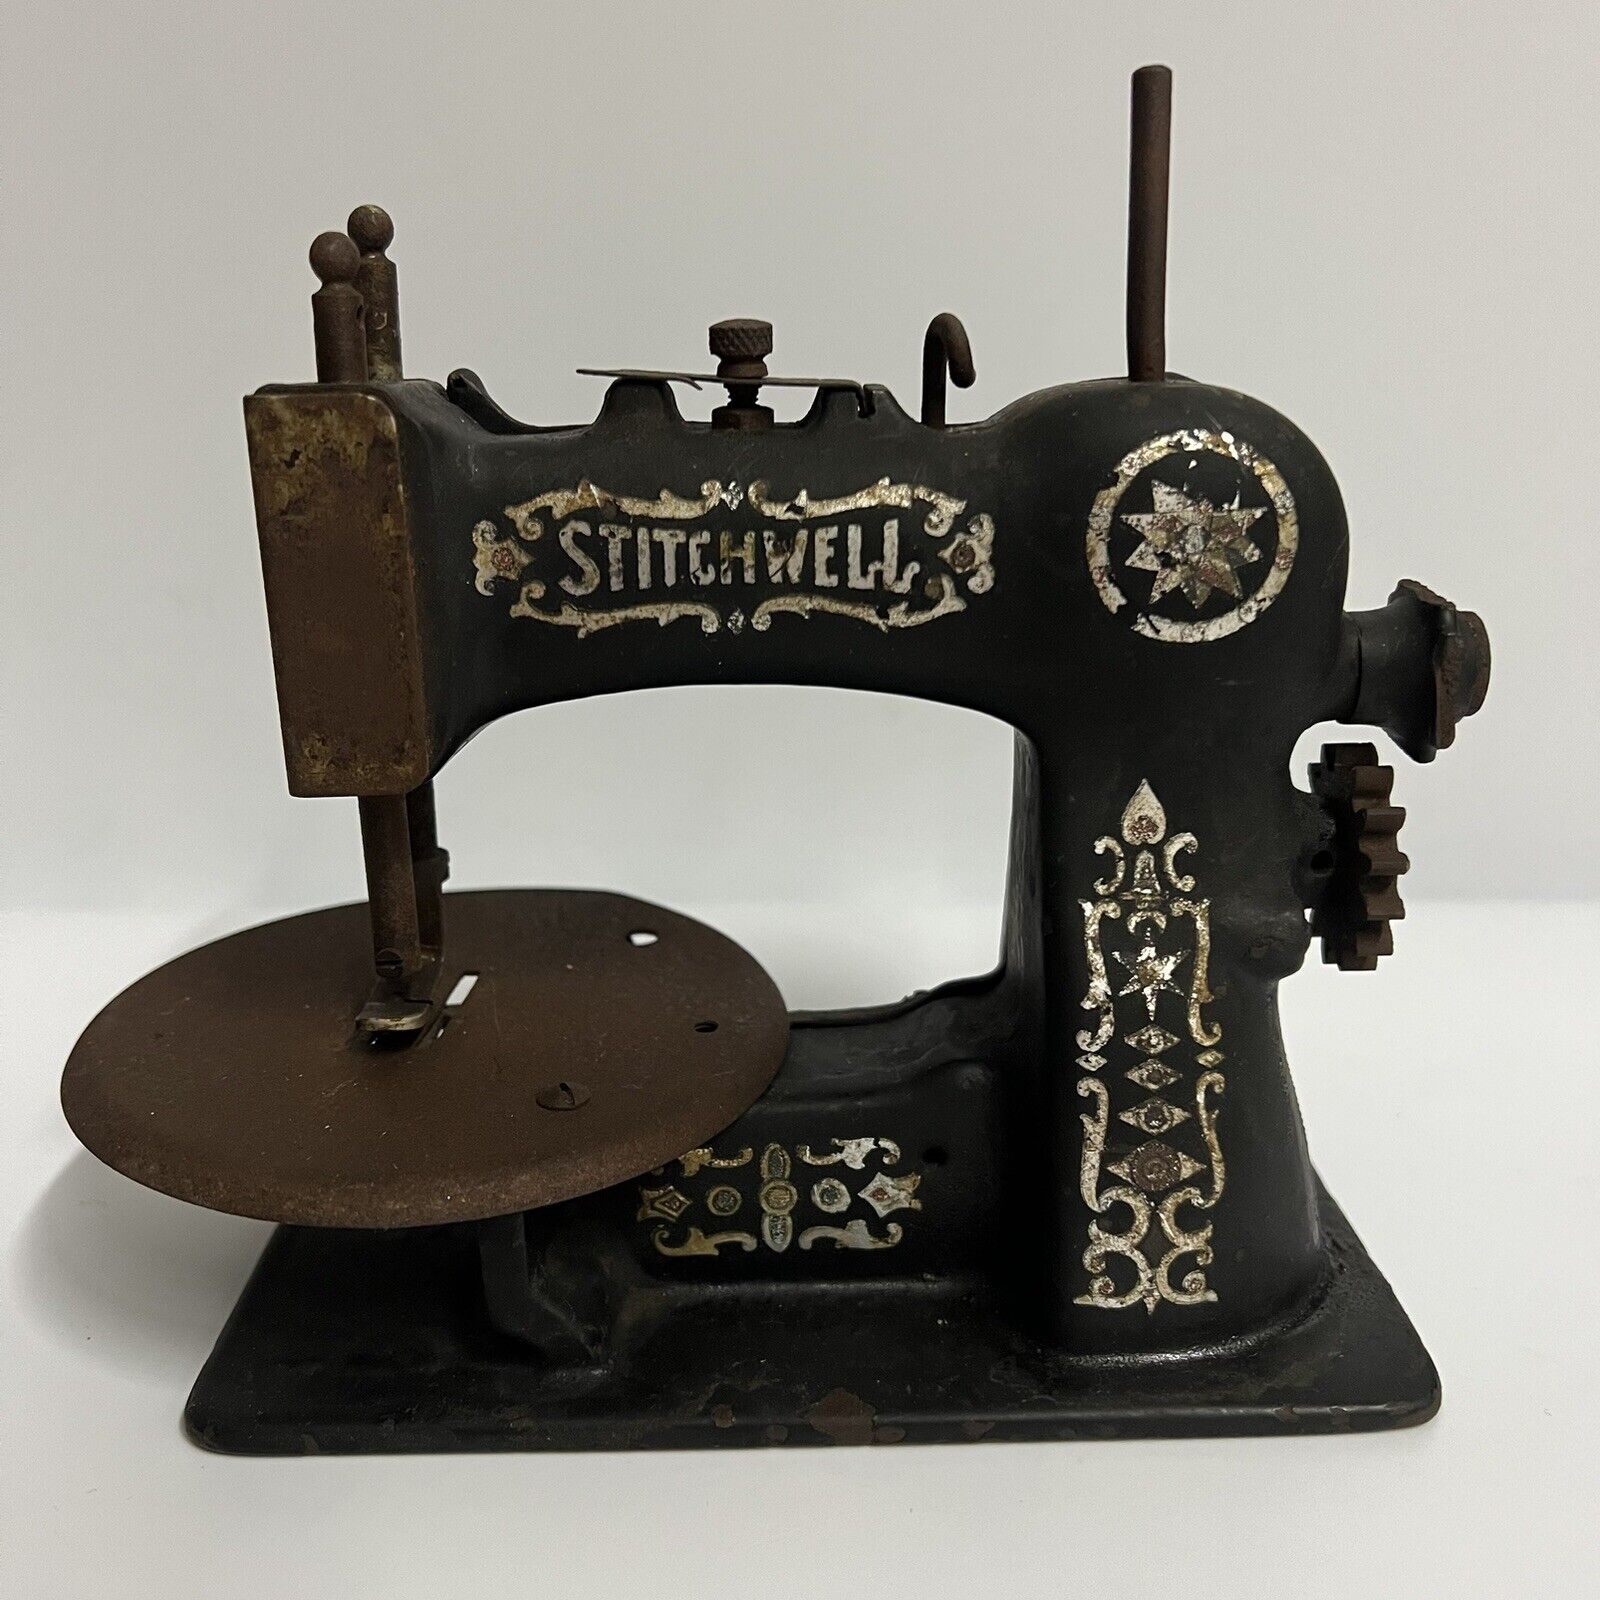 Stitchwell Toy Sewing Machine Hand Crank Cast Iron Collectible Vintage